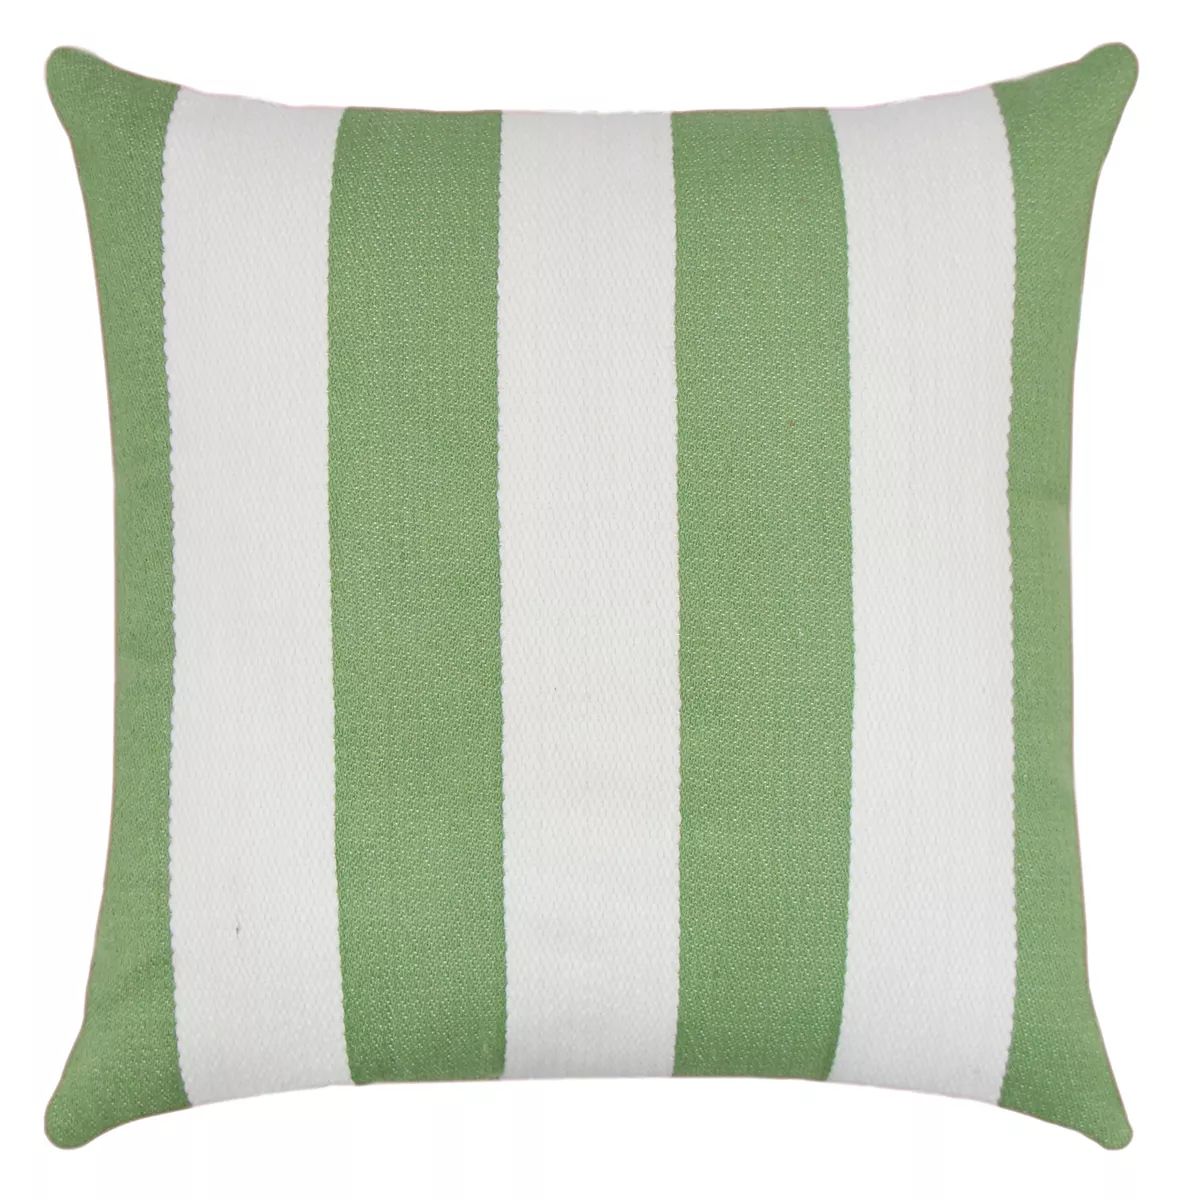 Sonoma Goods For Life® Woven Striped Cabana Outdoor Throw Pillow | Kohl's